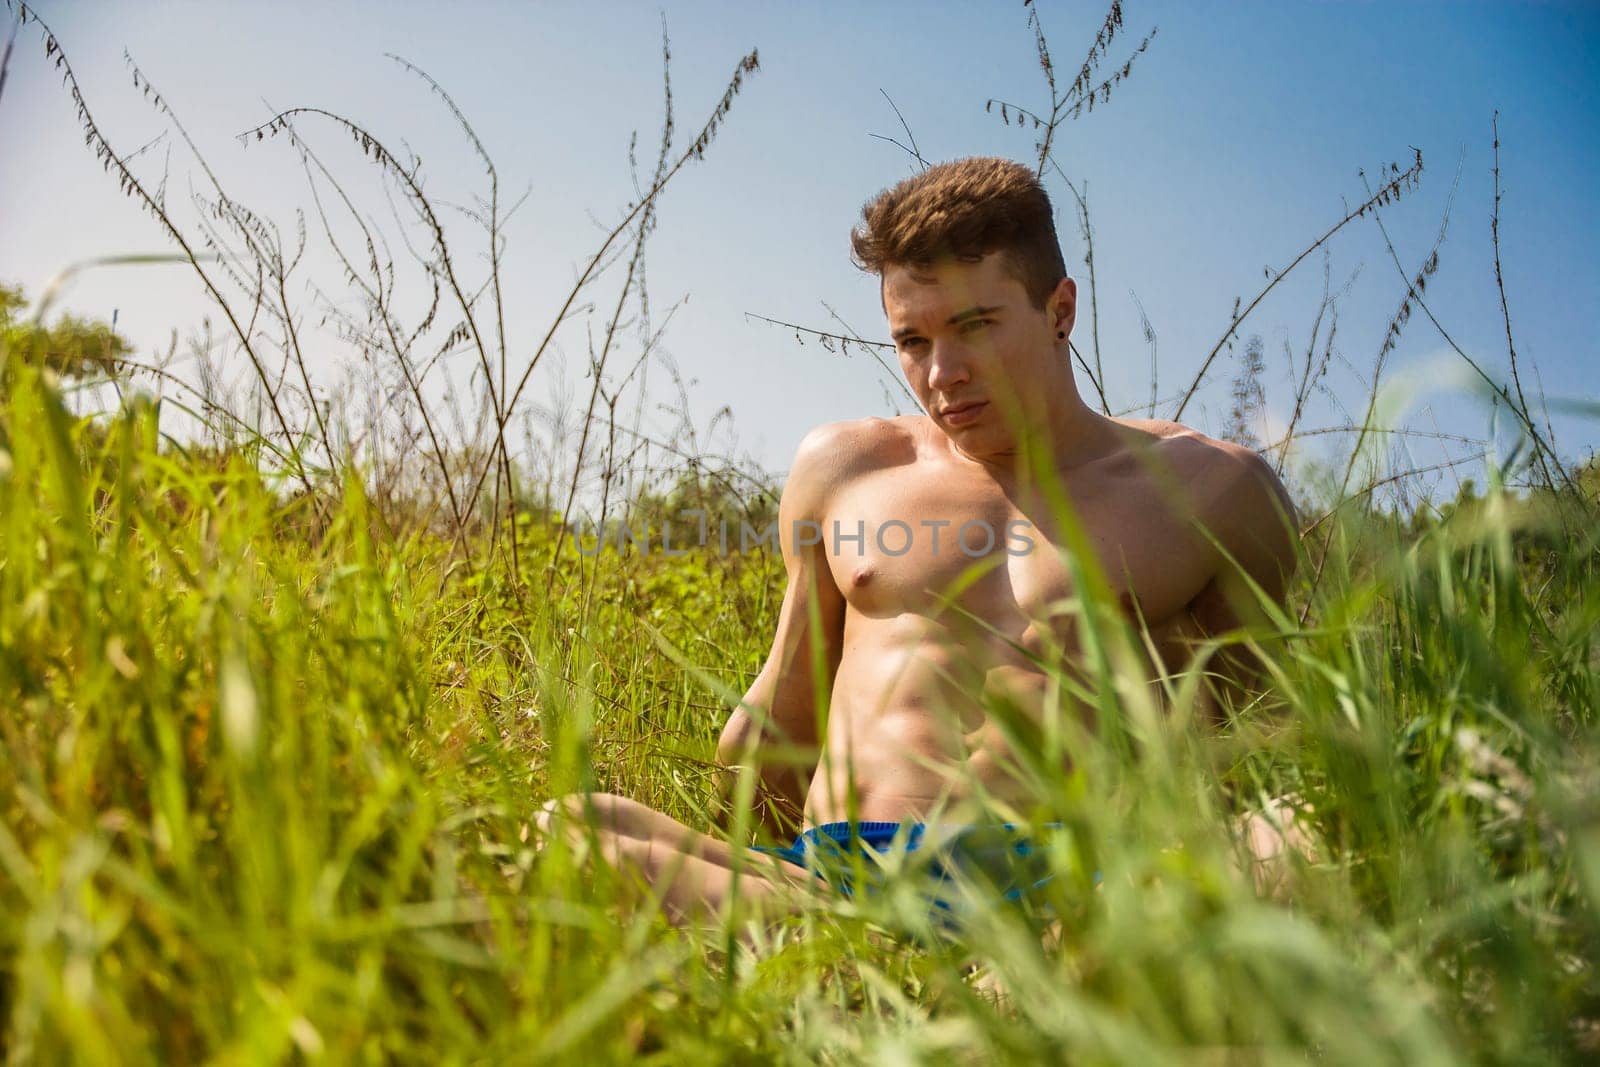 Handsome Muscular Shirtless Young Hunk Man Outdoor in Nature Sitting on Grass. Showing Healthy Muscle Body While Looking away